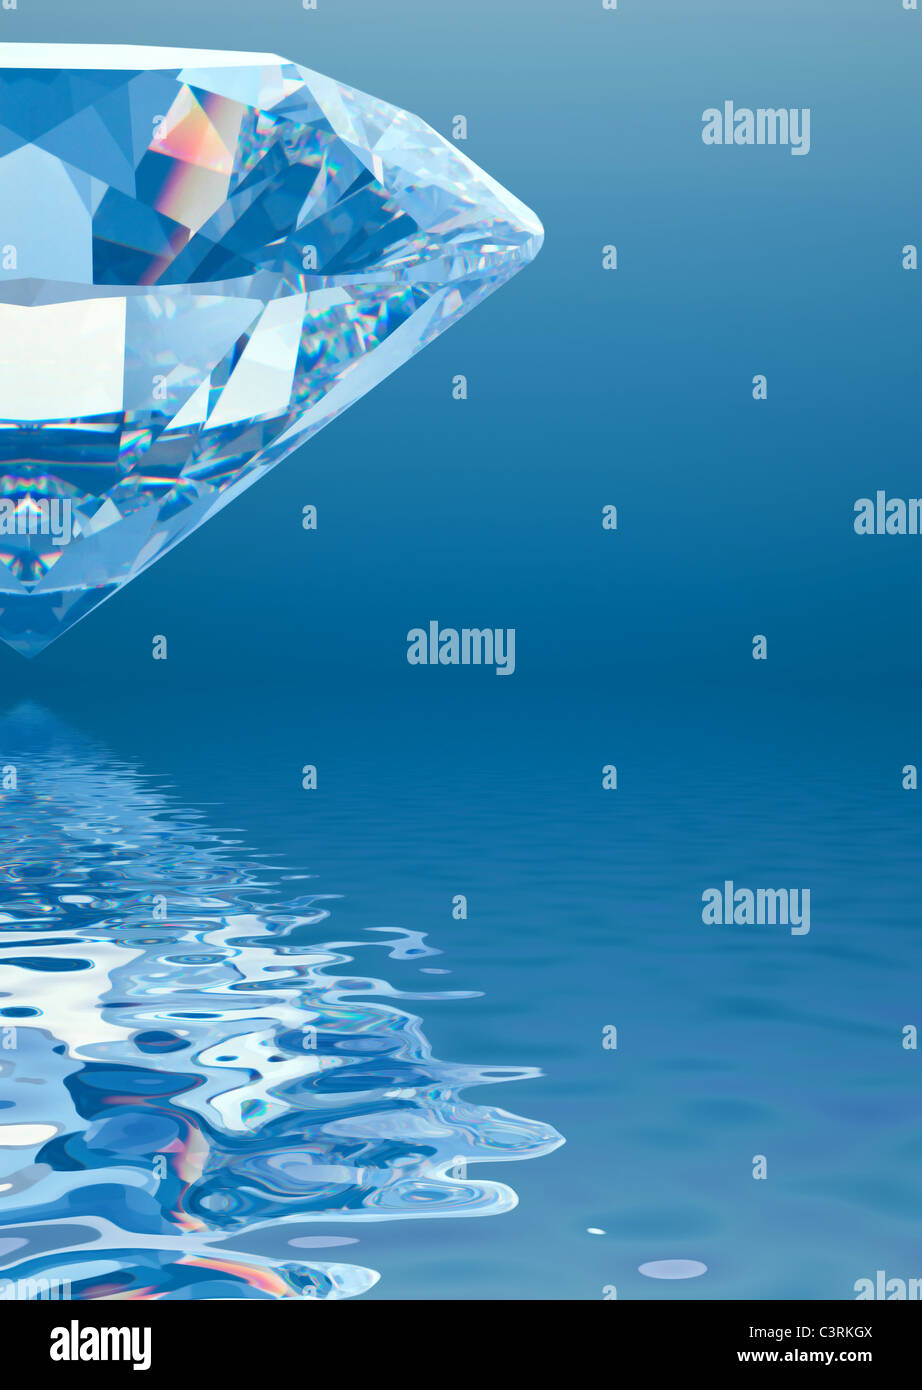 Blue diamond with reflection in water Stock Photo